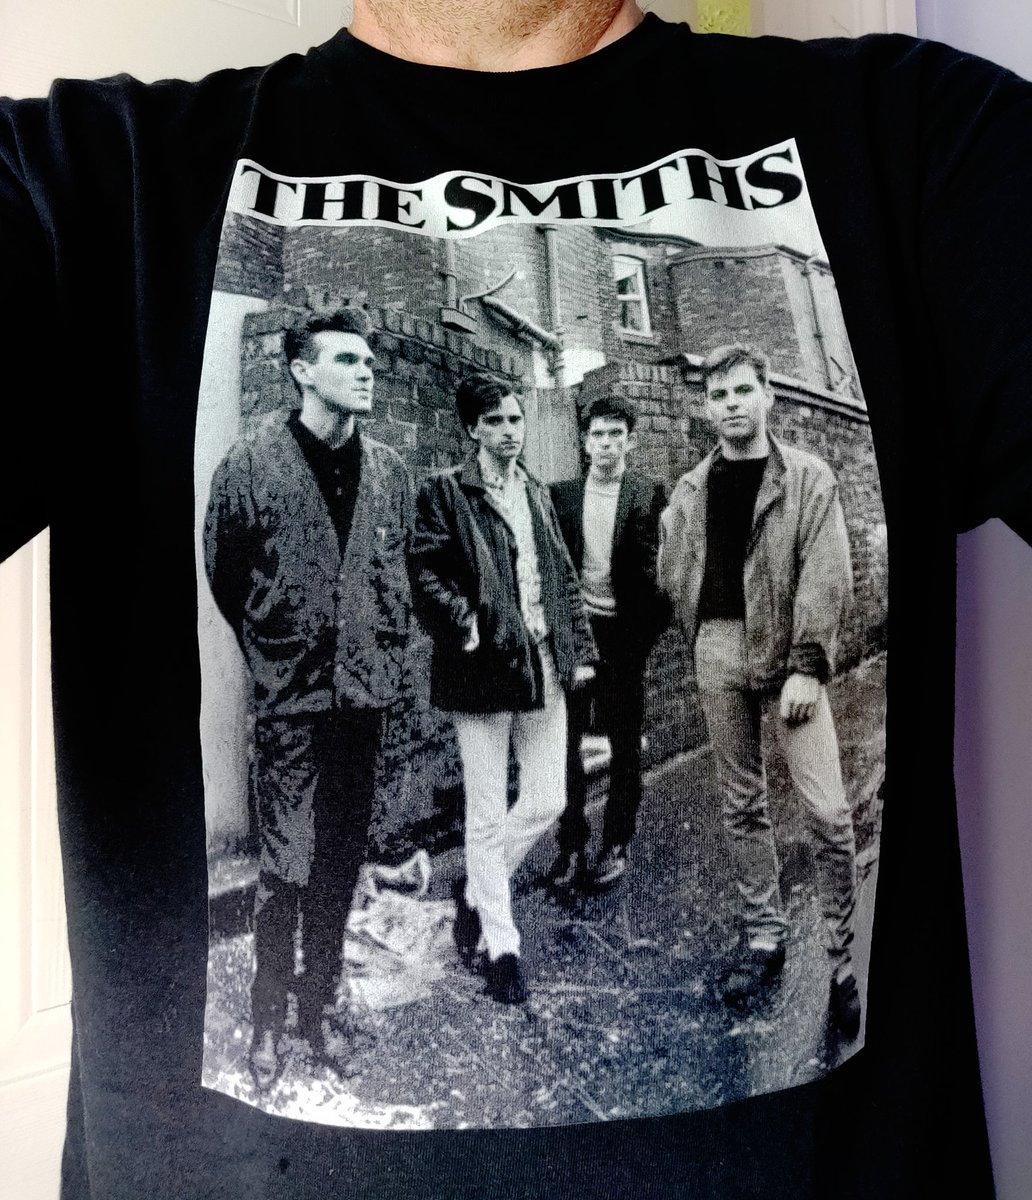 Today's t-shirt #TheSmiths #morrissey #marr #rourke #joyce #TheQueenIsDead #salford #backstreets #photoshoot